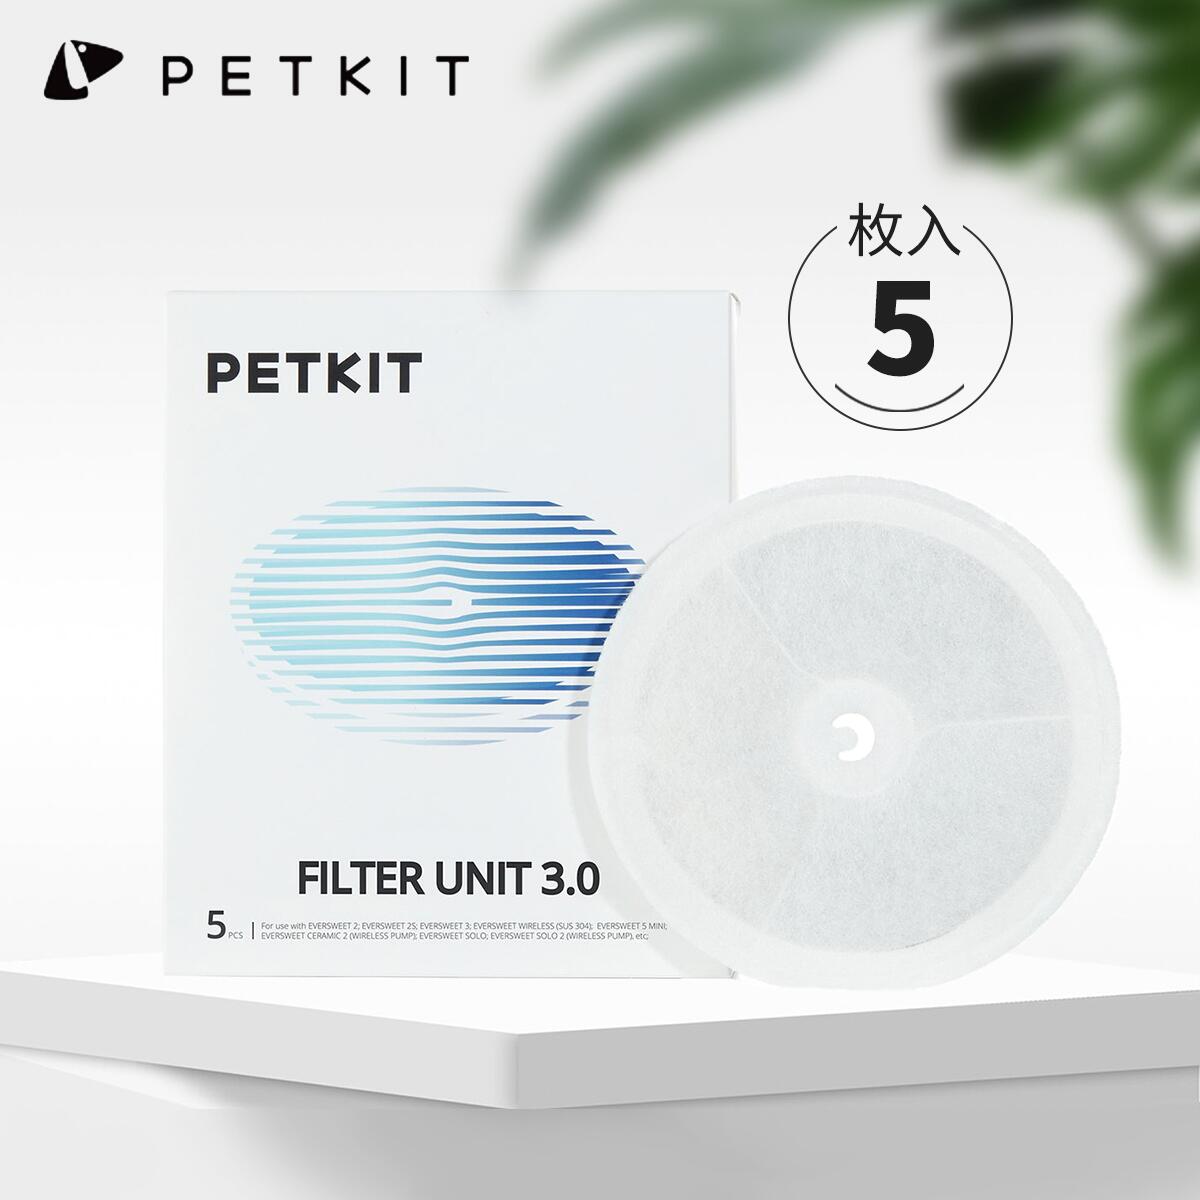 PETKIT【正規品】フィルター 3.0 新型 ペットキット 給水器 2nd世代 3nd世代 PETKIT CYBERTAIL 給水器交換用フィルター 5コセット 